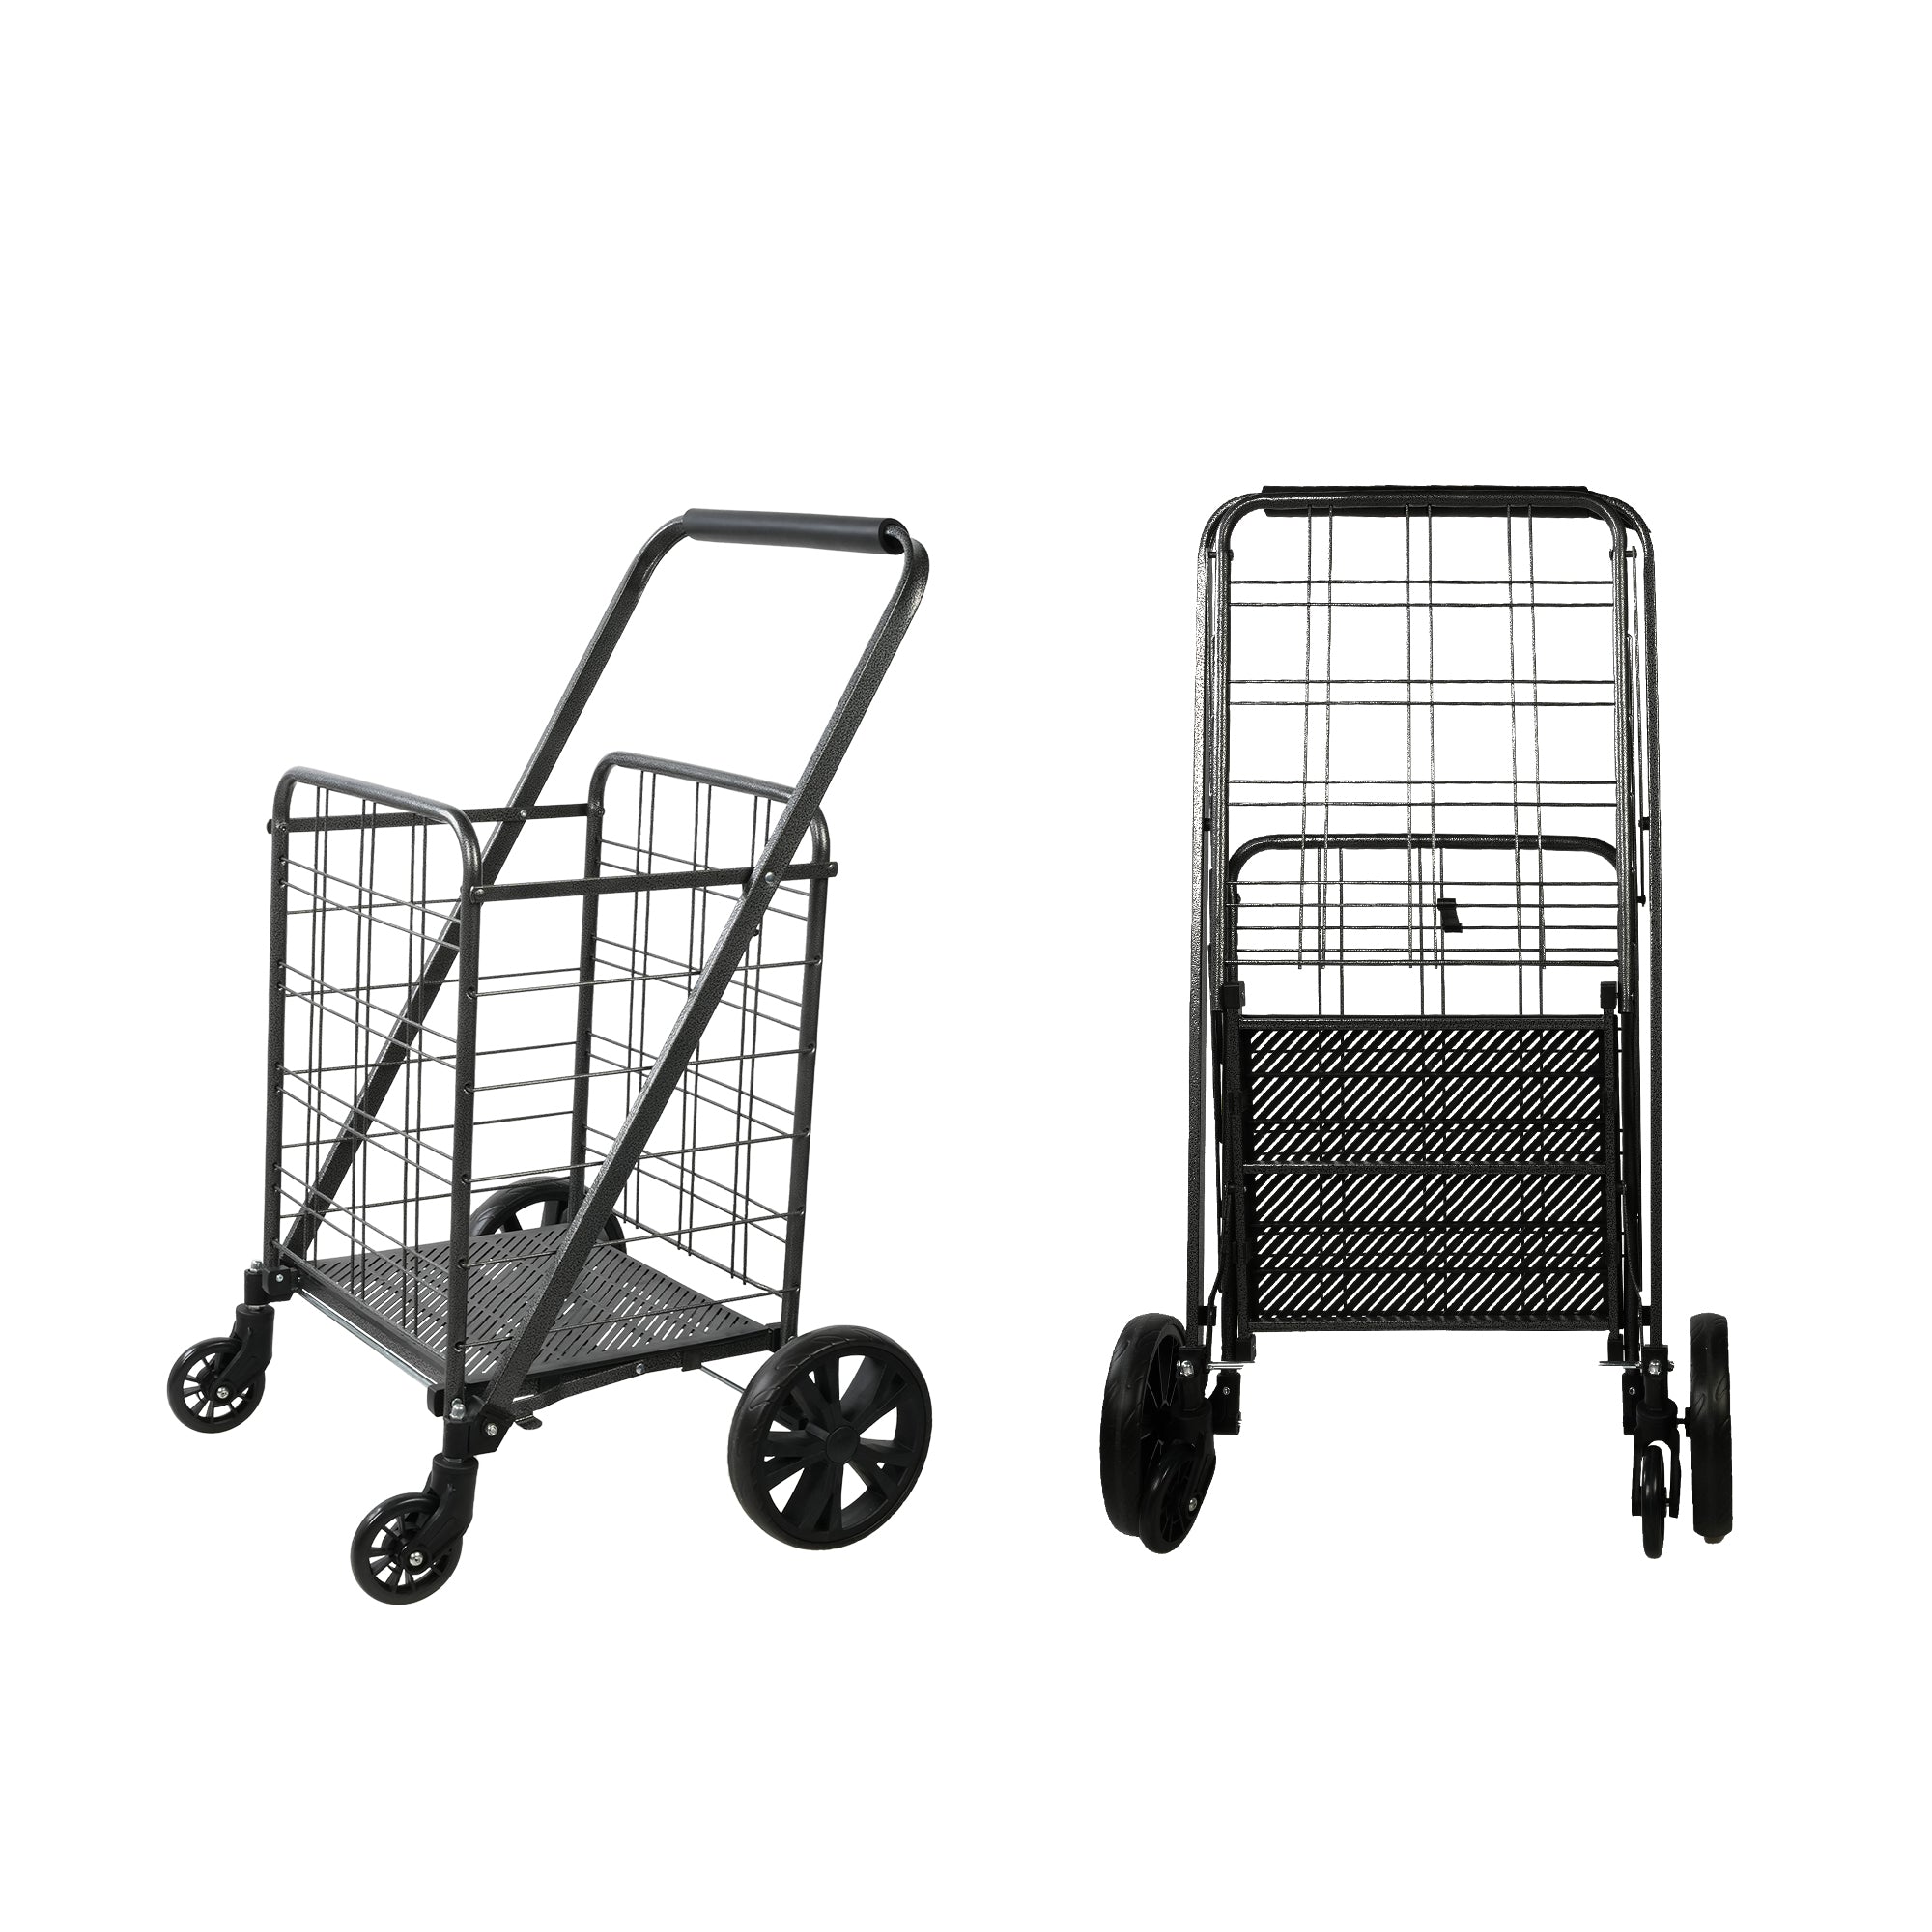 Folding shopping cart with 360° rotating wheels, suitable for grocery, laundry, books, luggage travel, 77 pound capacity, black